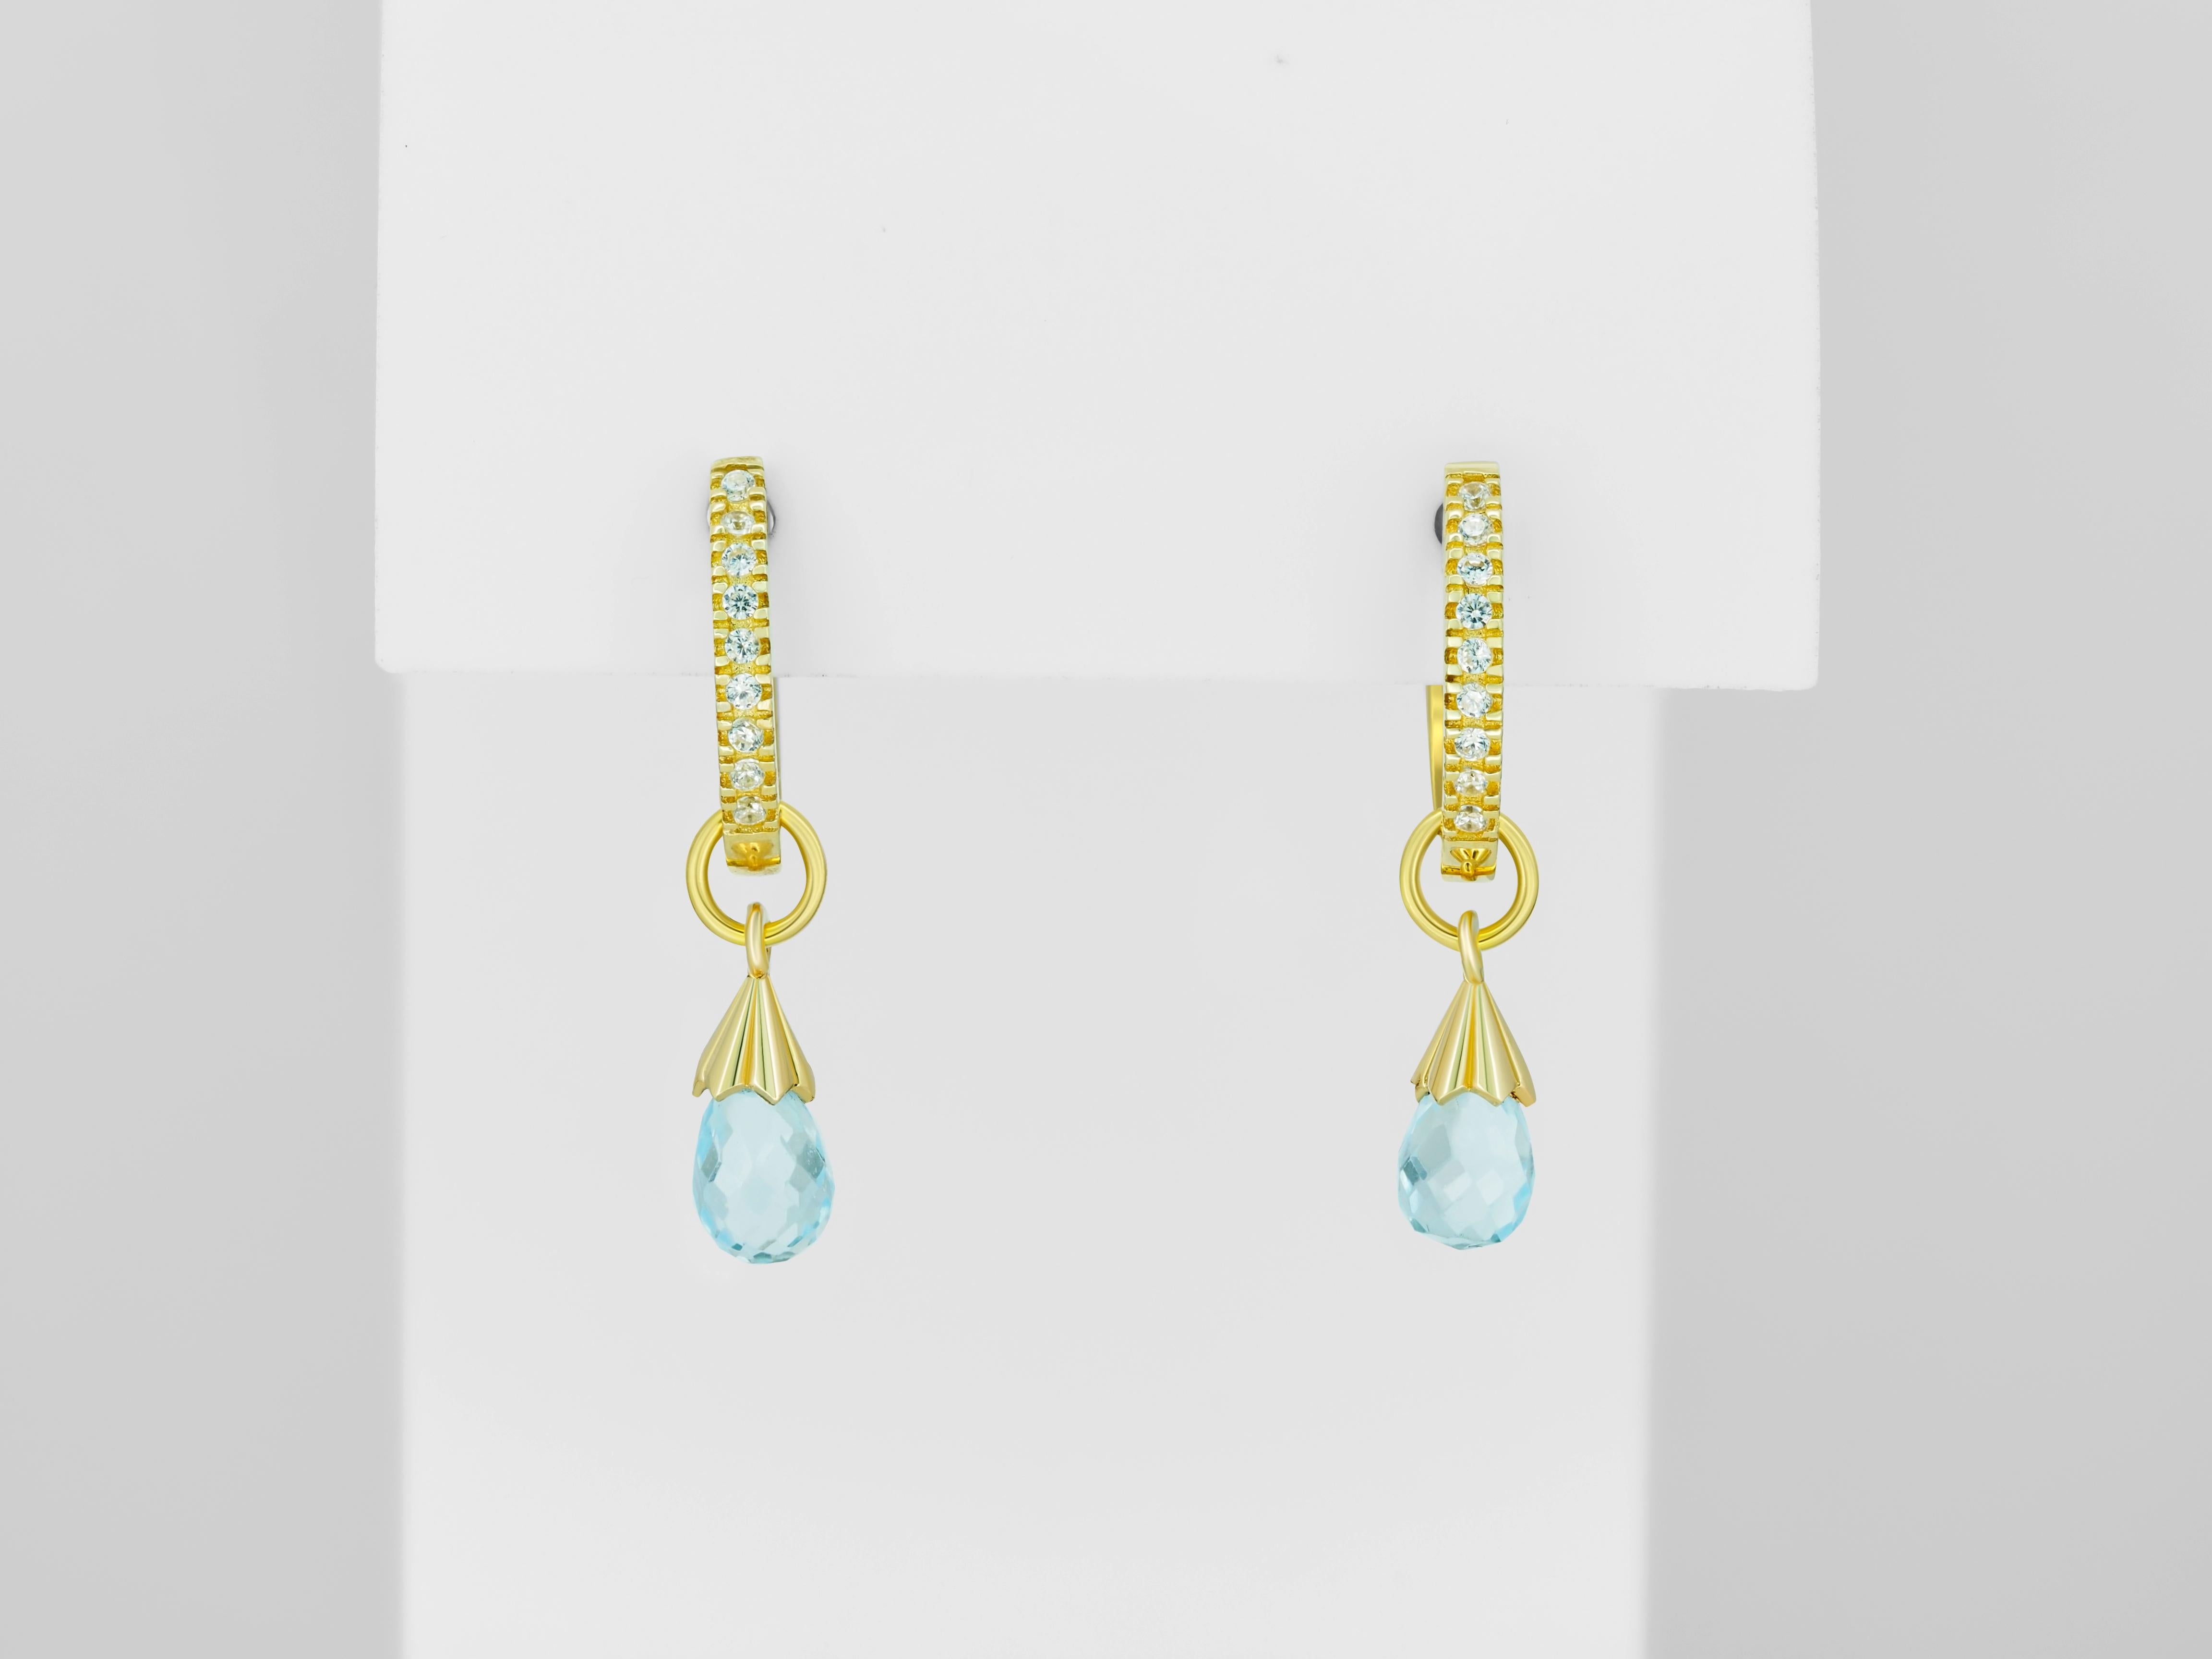 Modern Hoop Earrings and Topaz Briolette Charms in 14k Gold For Sale